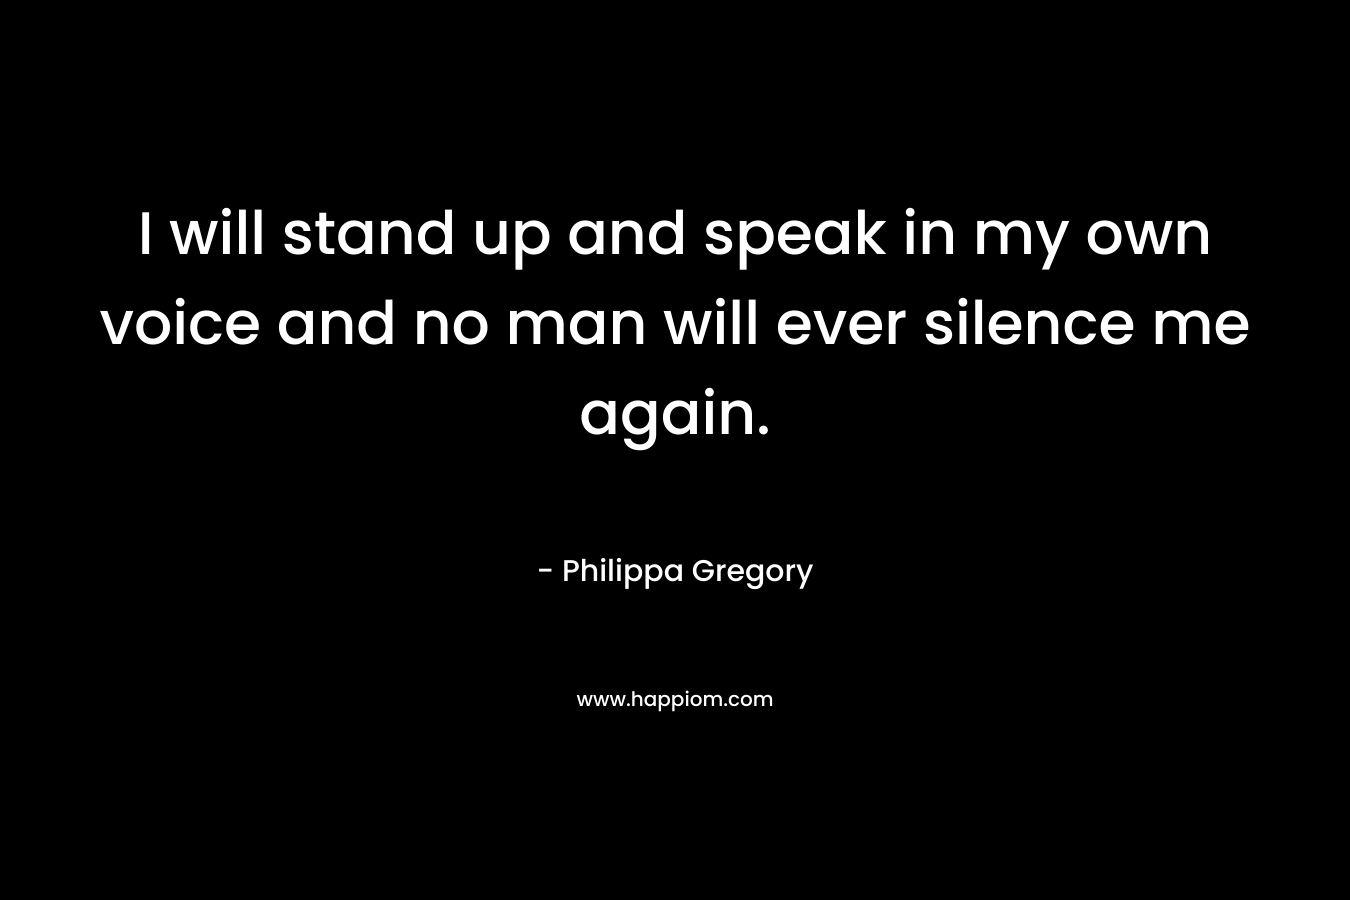 I will stand up and speak in my own voice and no man will ever silence me again.